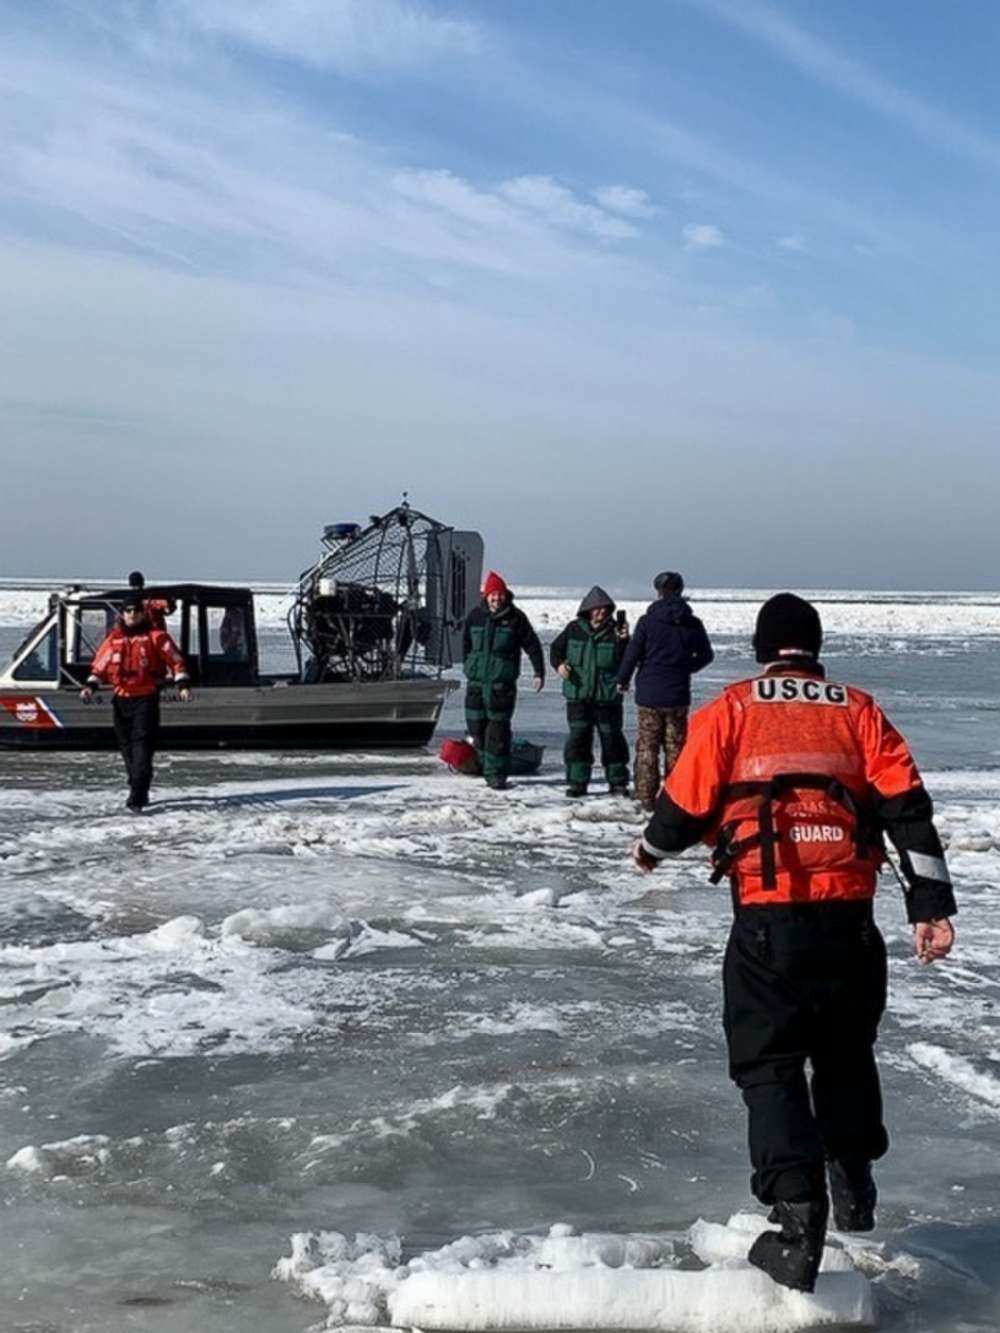 PHOTO: Forty-six ice fishermen were rescued by the U.S. Coast Guard near Catawba Island, Ohio, after becoming stranded an ice floe on Saturday, March 9, 2019.